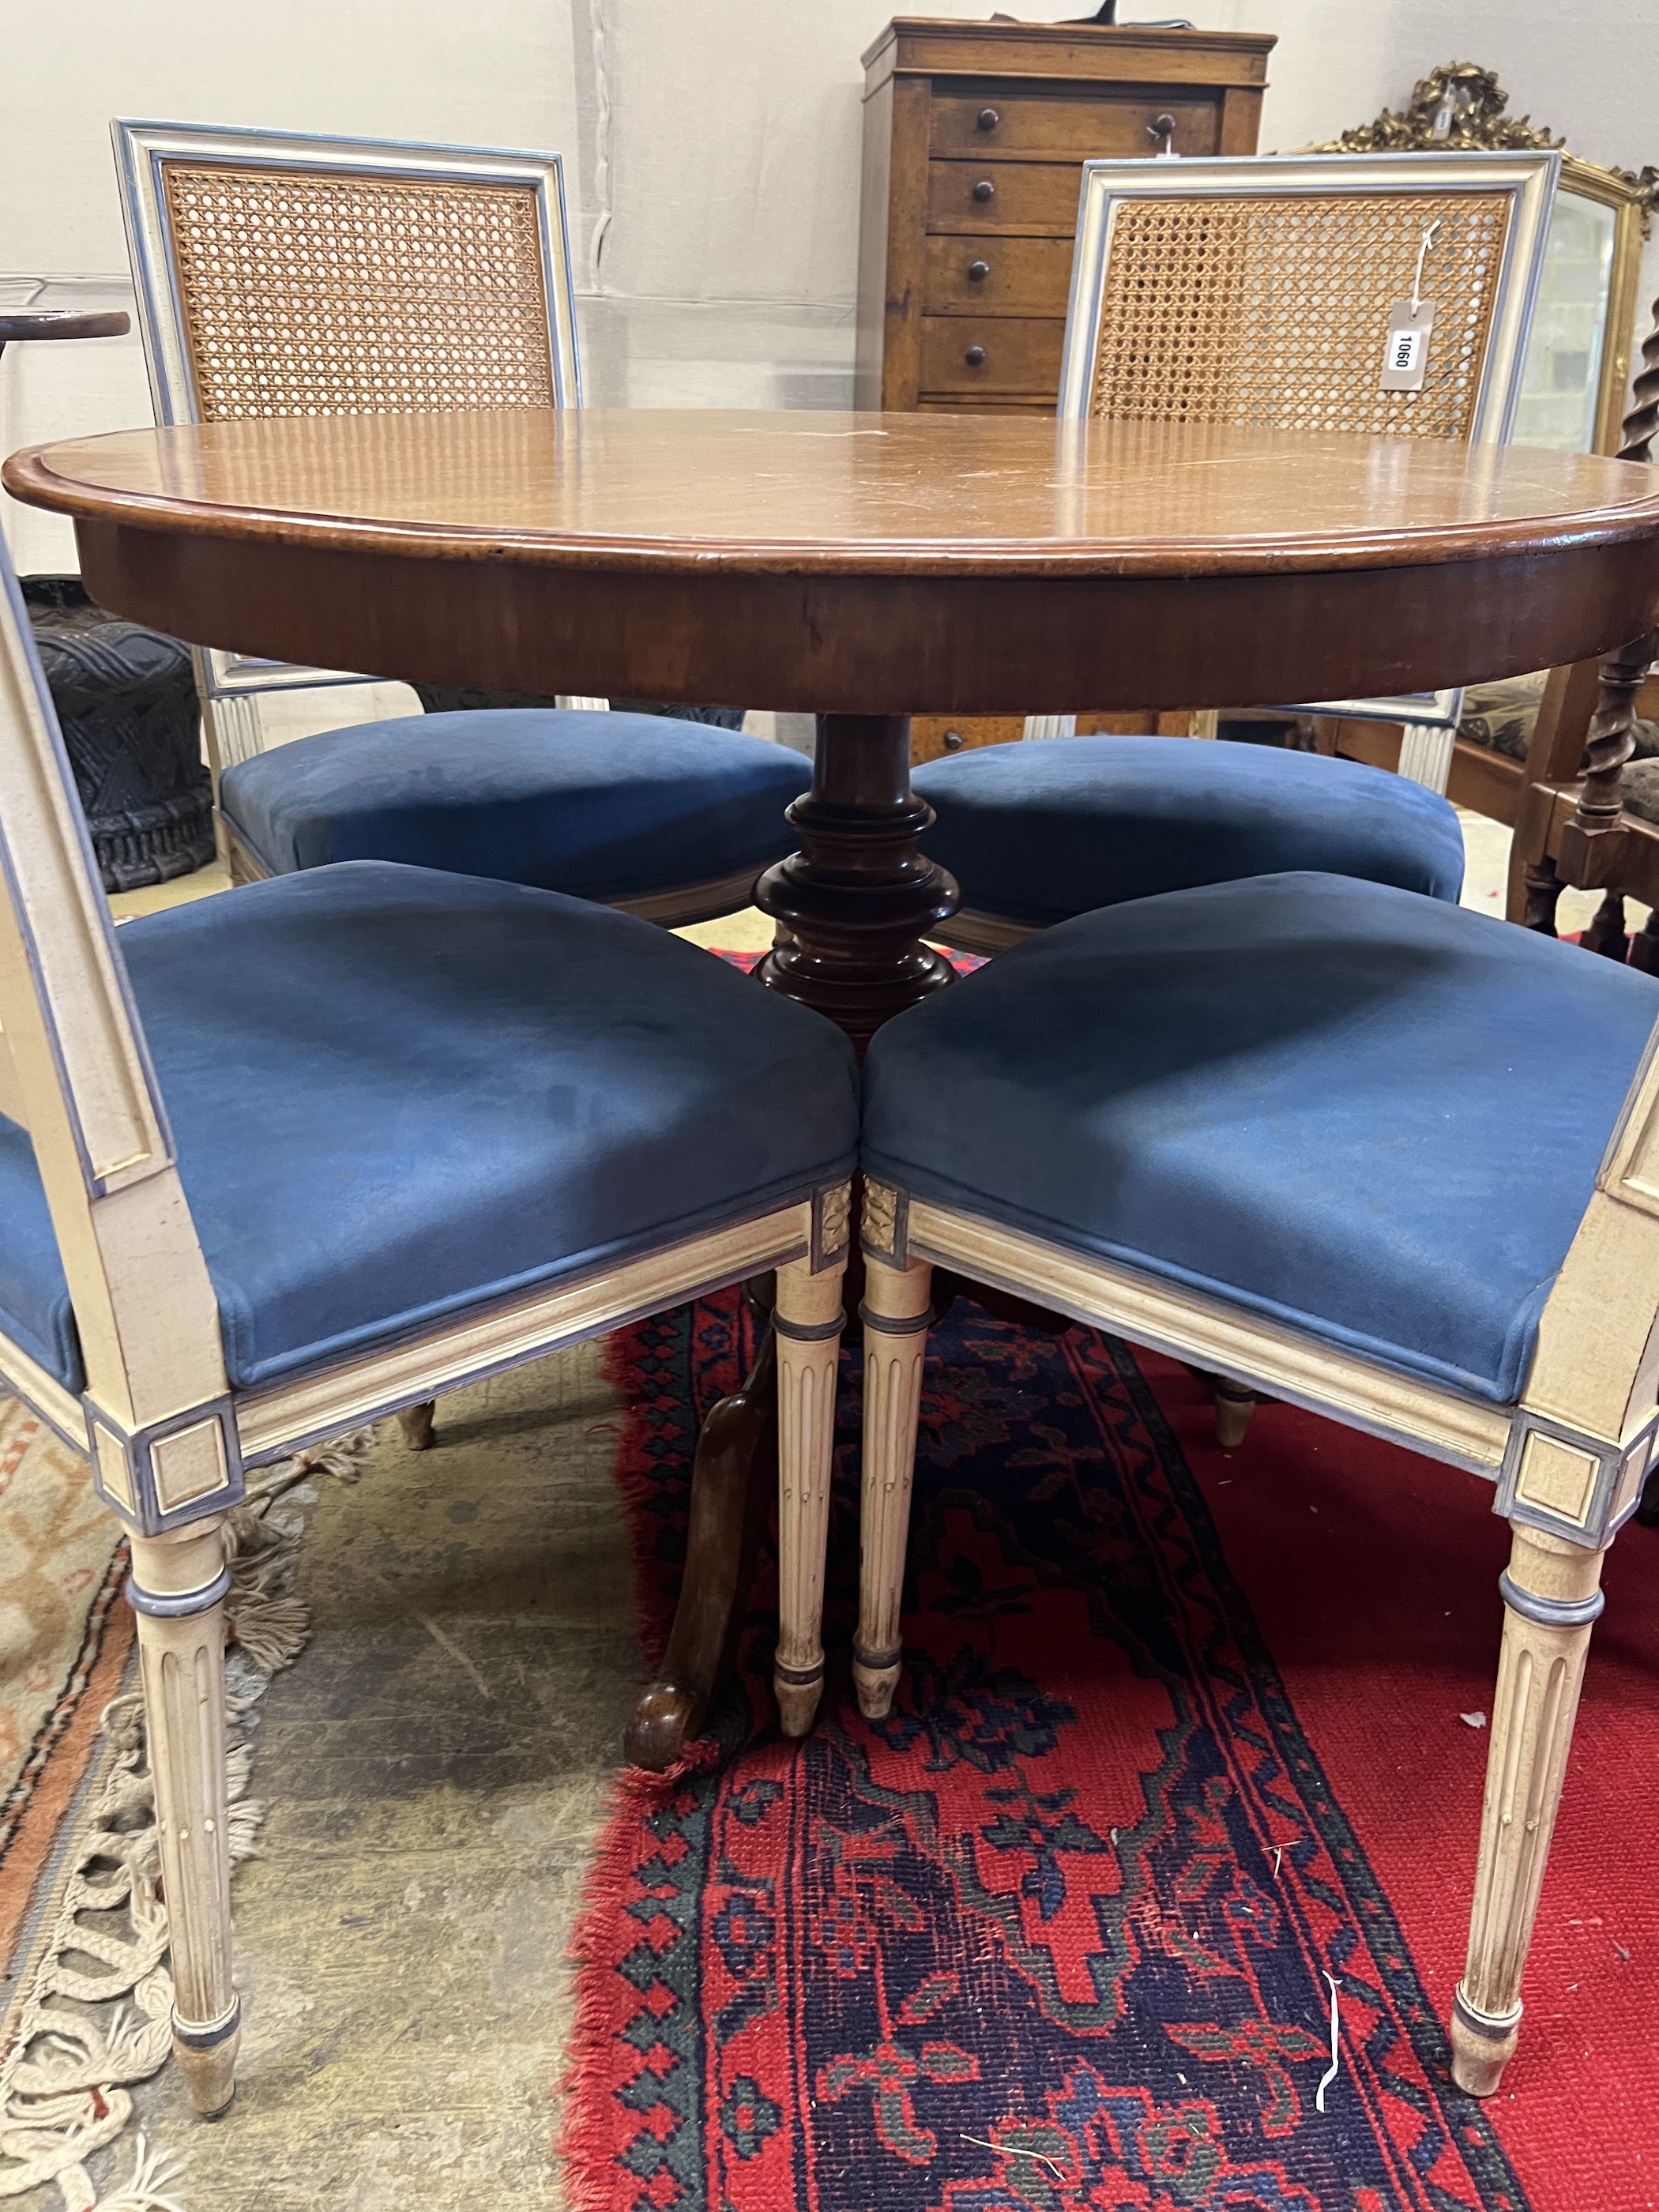 A set of four French style painted caned back dining chairs